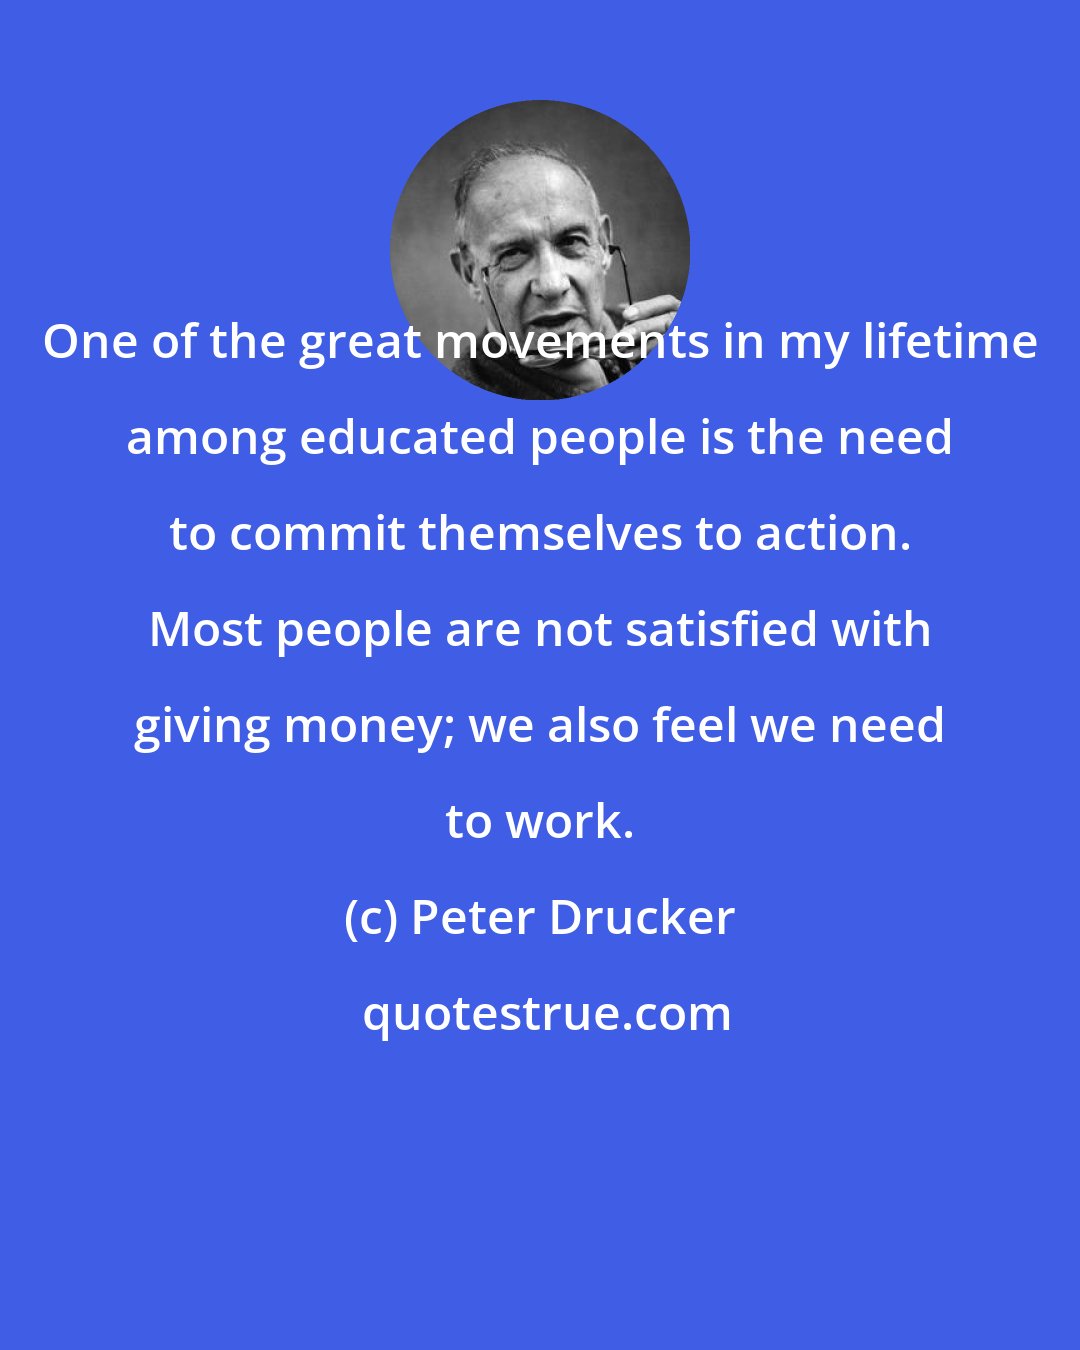 Peter Drucker: One of the great movements in my lifetime among educated people is the need to commit themselves to action. Most people are not satisfied with giving money; we also feel we need to work.